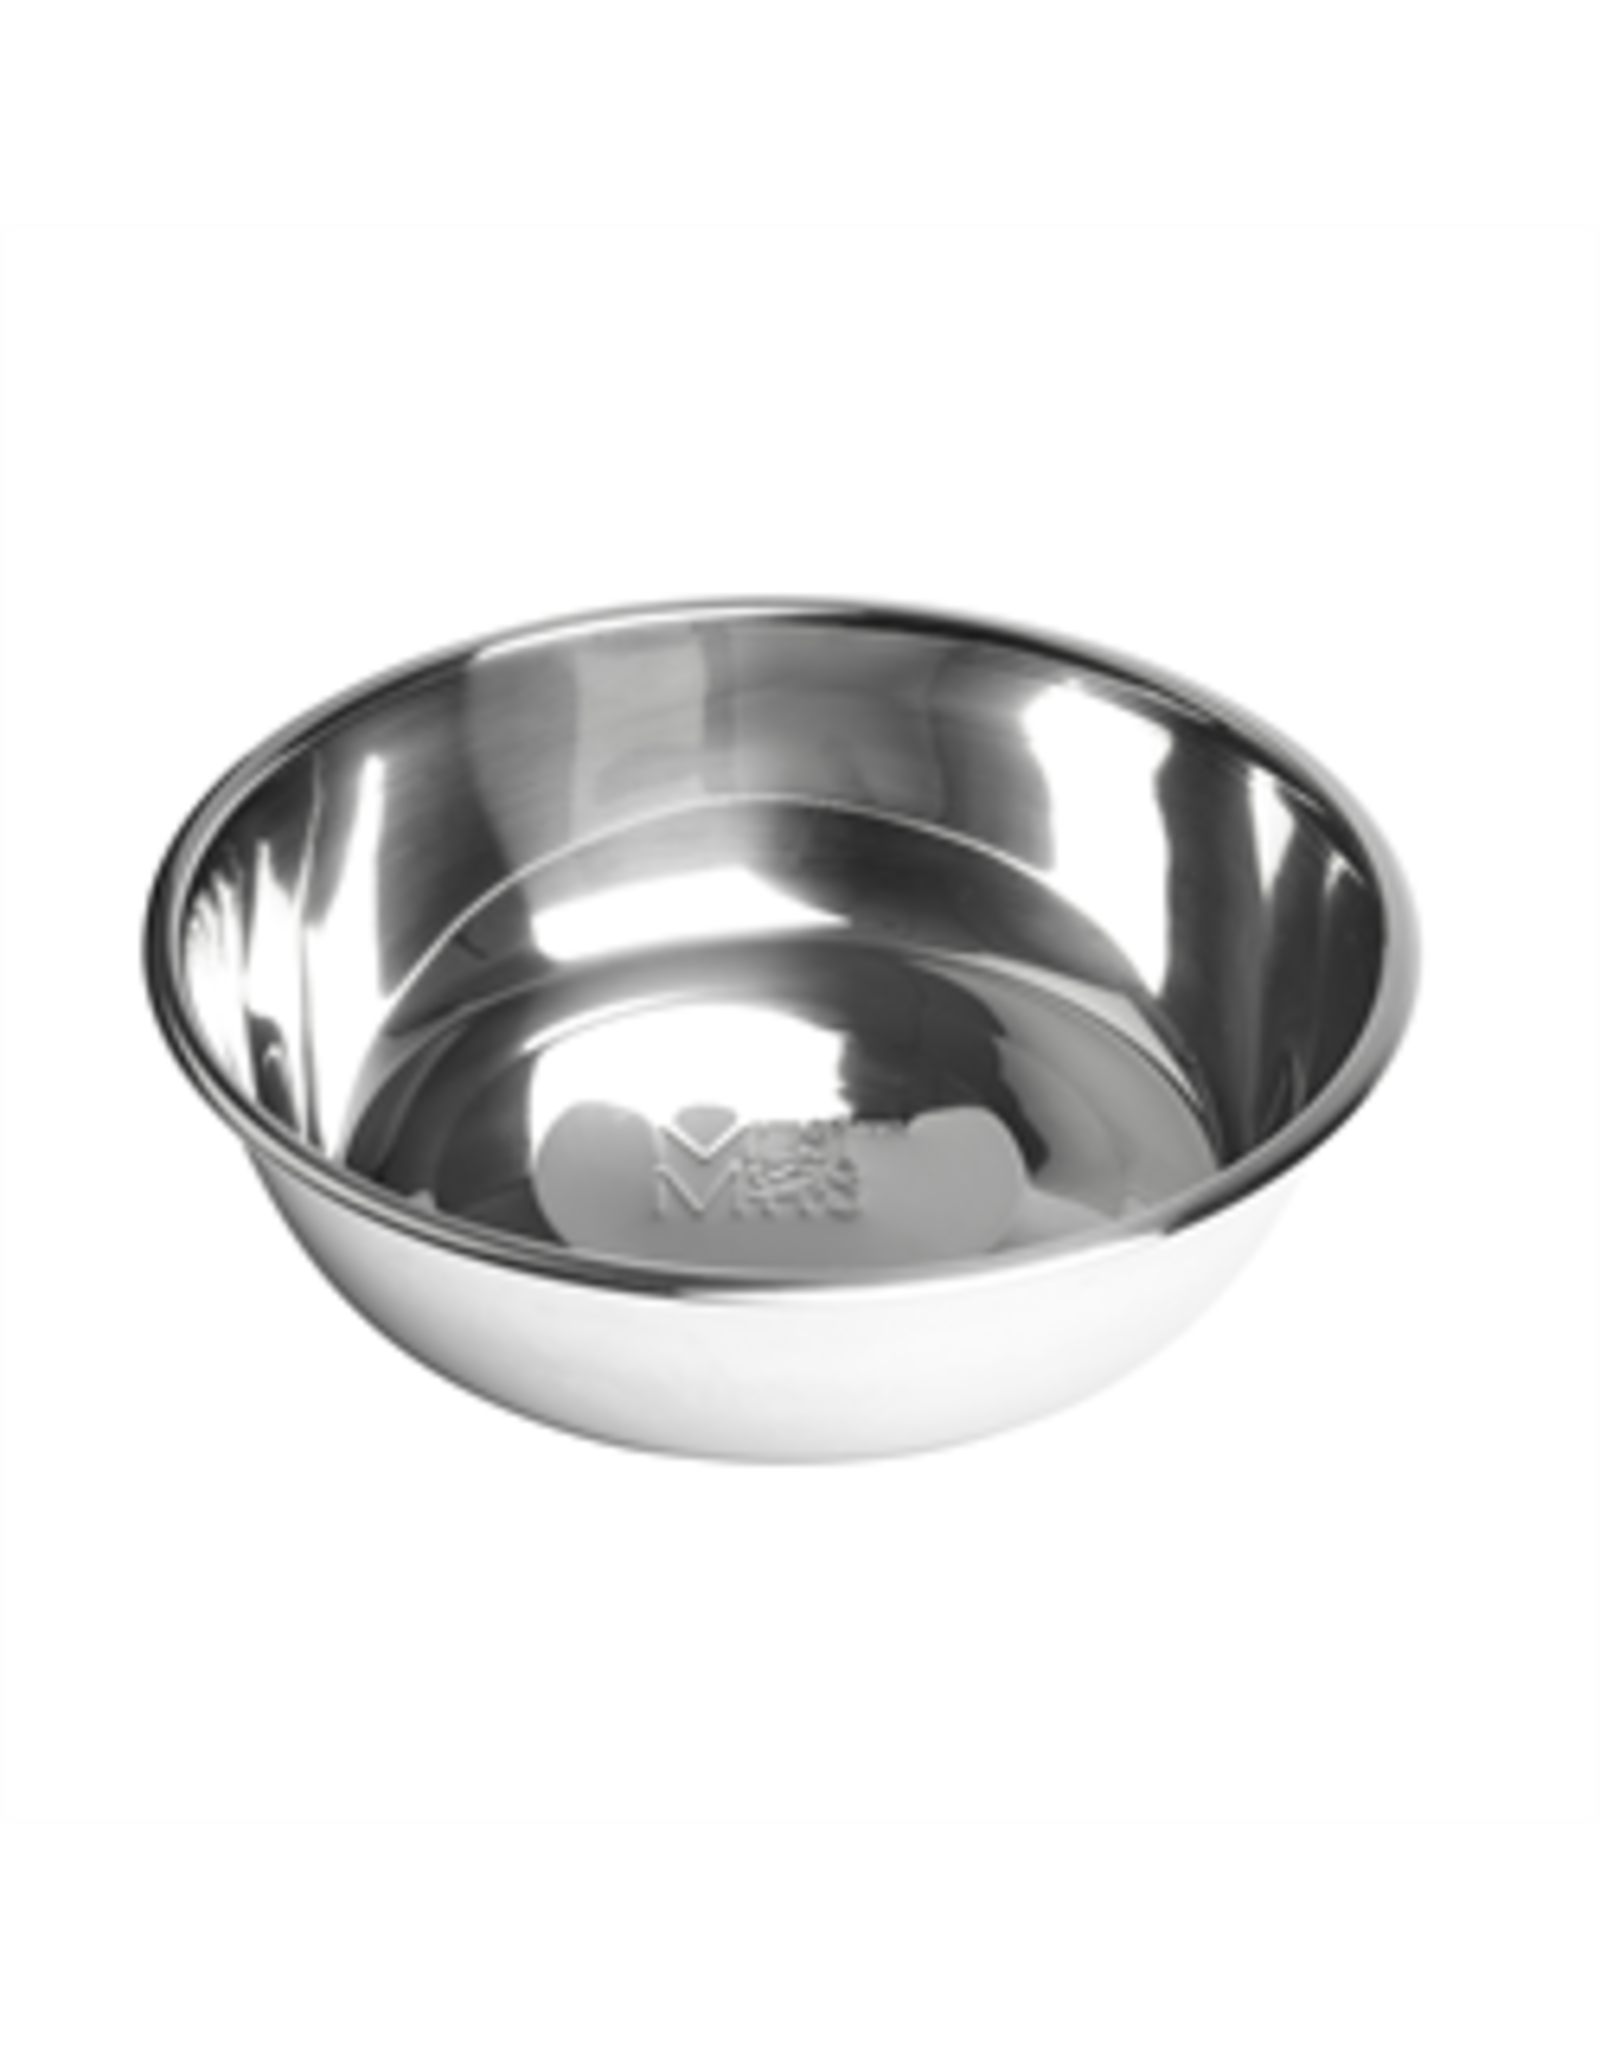 MessyMutts MessyMutts - StainlessBowl - MD 1.5cups